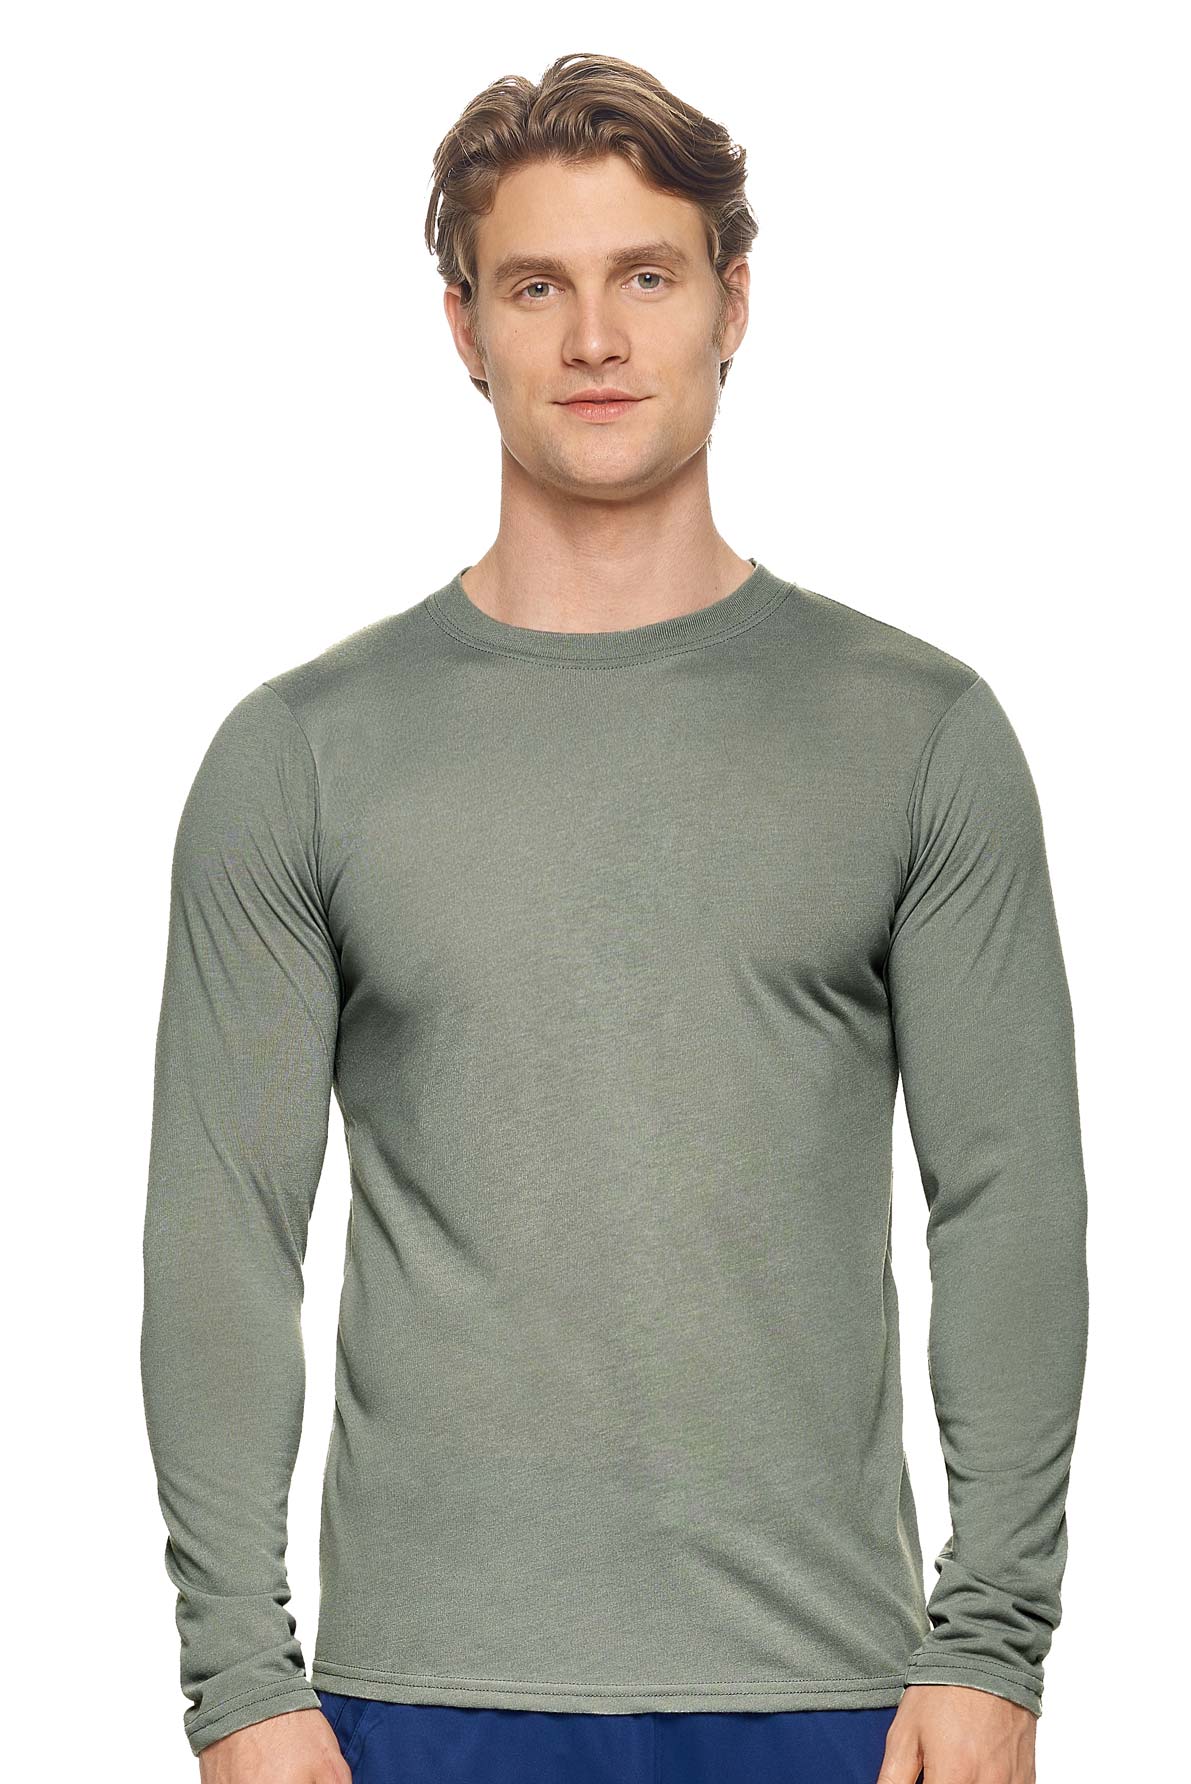 Expert Brand Wholesale Men's In the Field Outdoors Long Sleeve Tee Made in USA PT808 Army Gray#army-gray